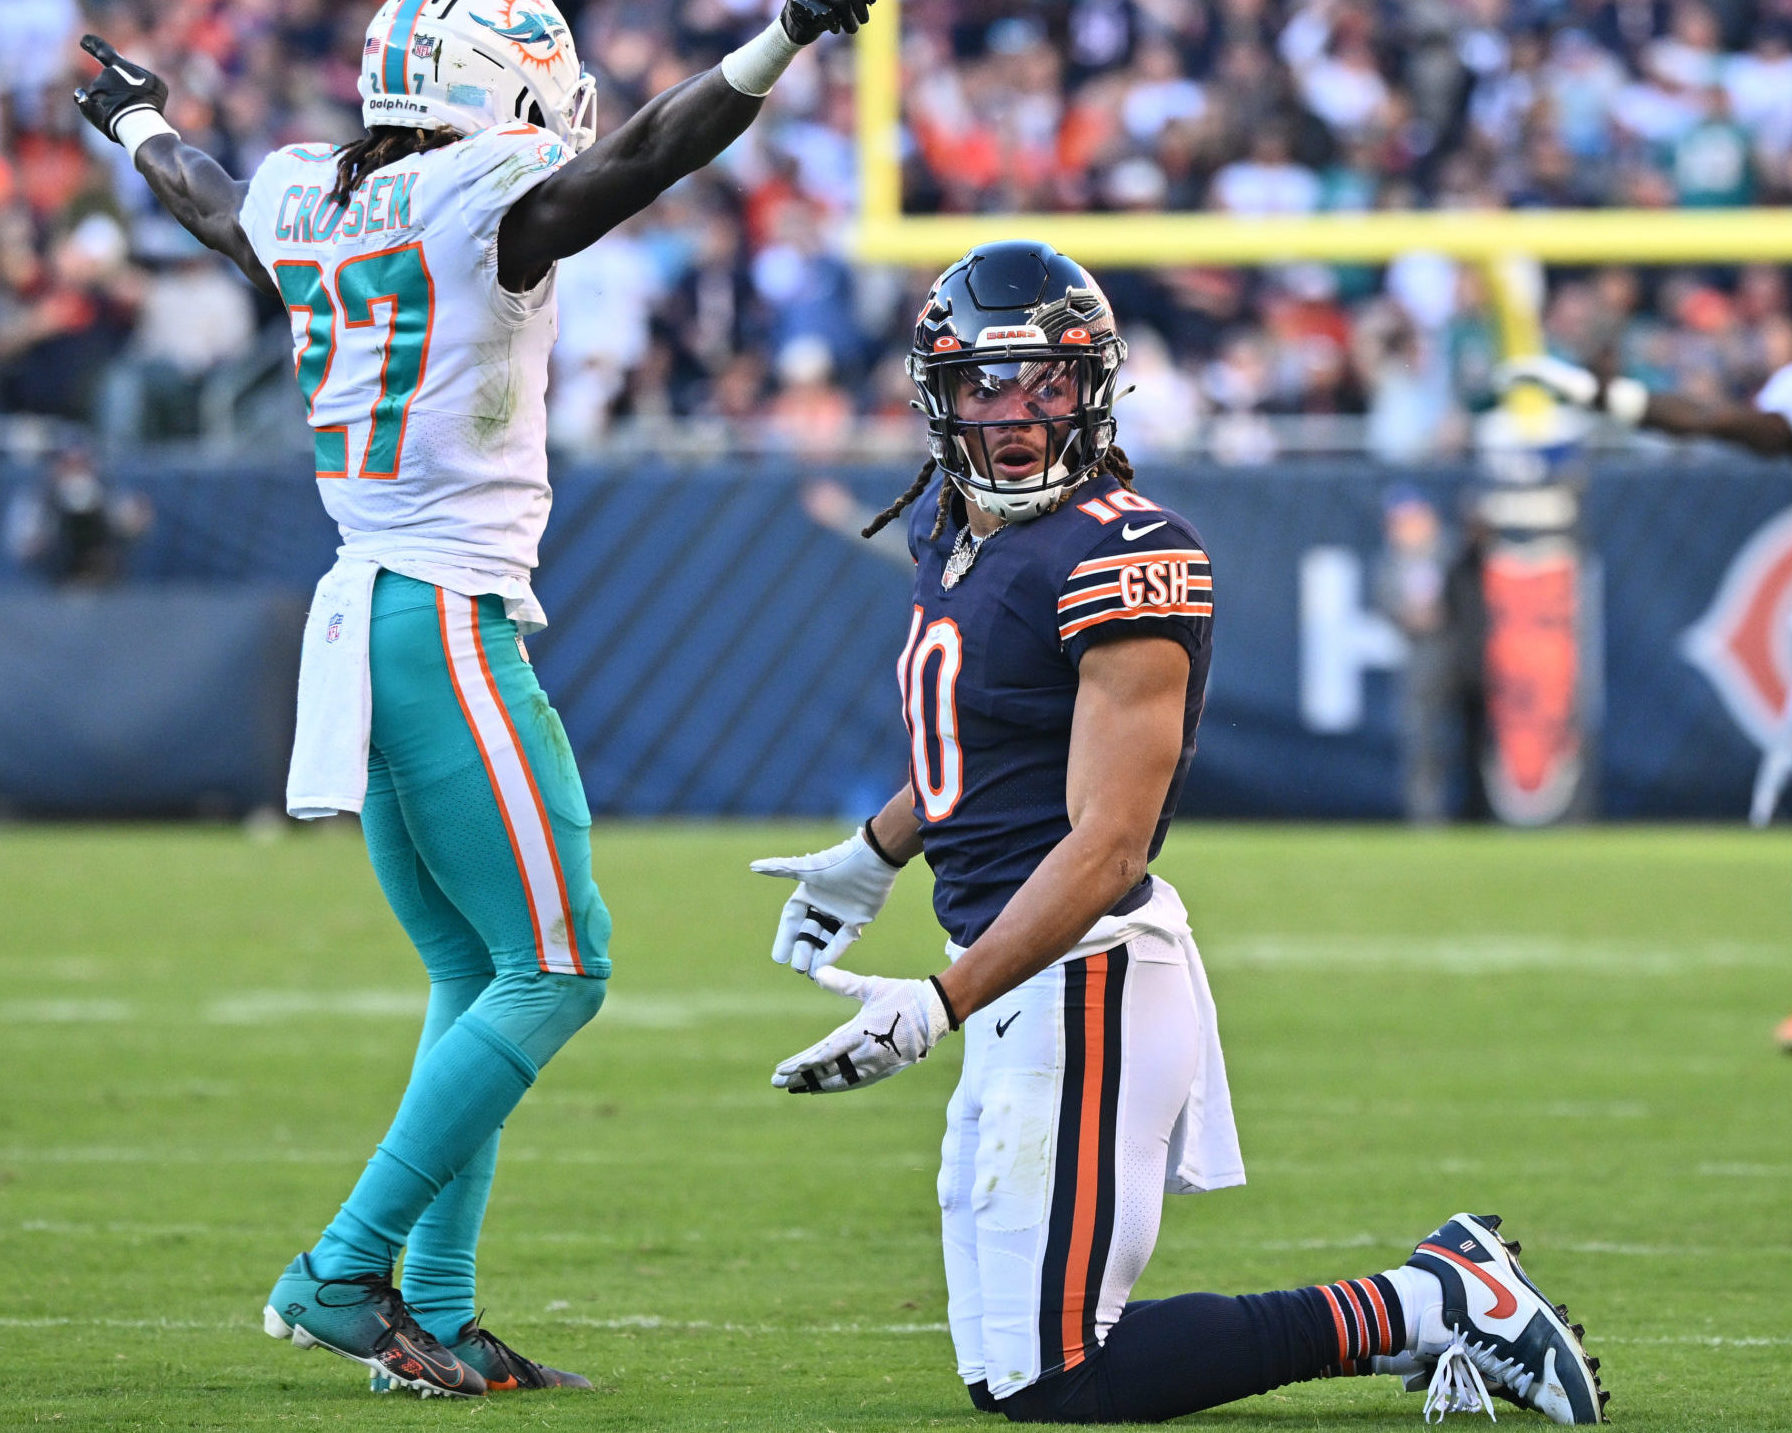 Missed Call Affected Outcome of Bears’ Loss to Dolphins